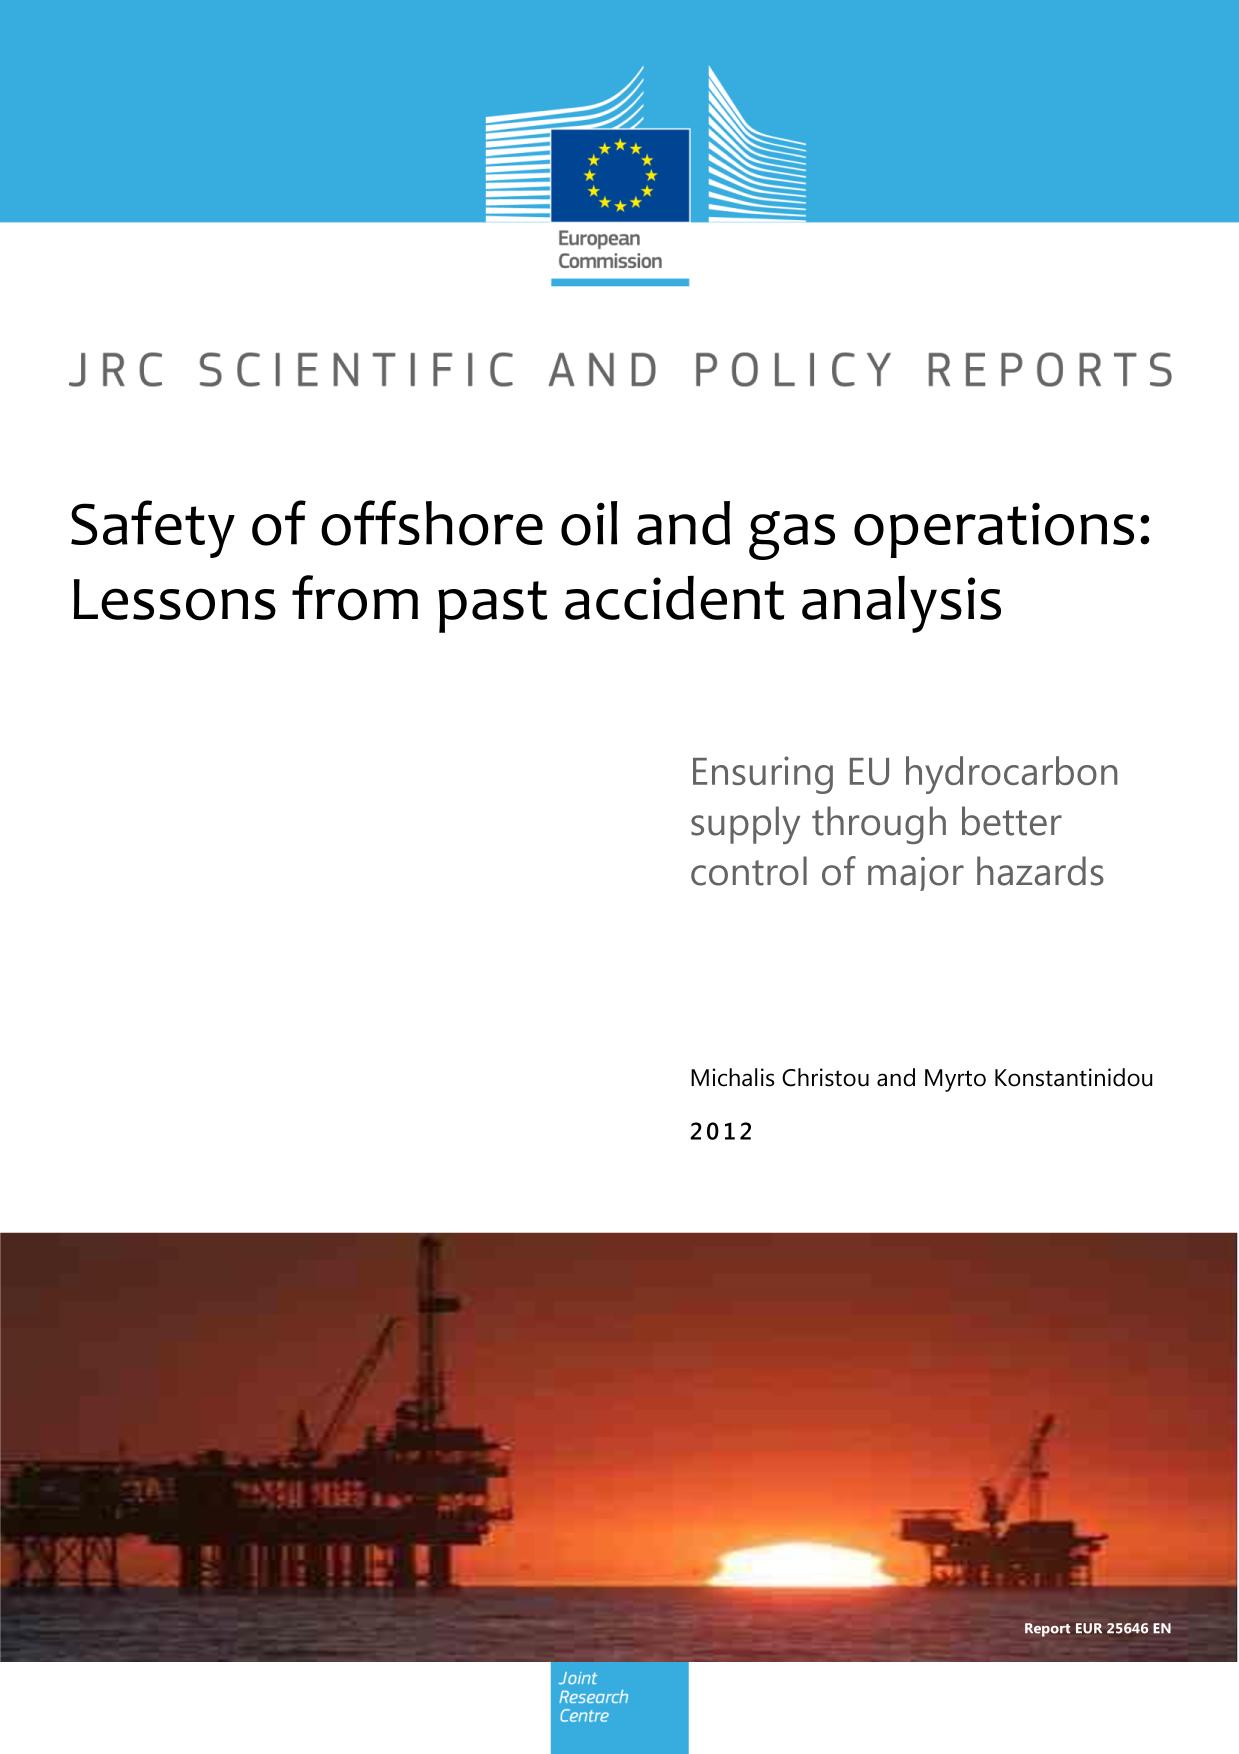 Safety of offshore oil and gas operations : lessons from past accident analysis : ensuring EU hydrocarbon supply through better control of major hazards.